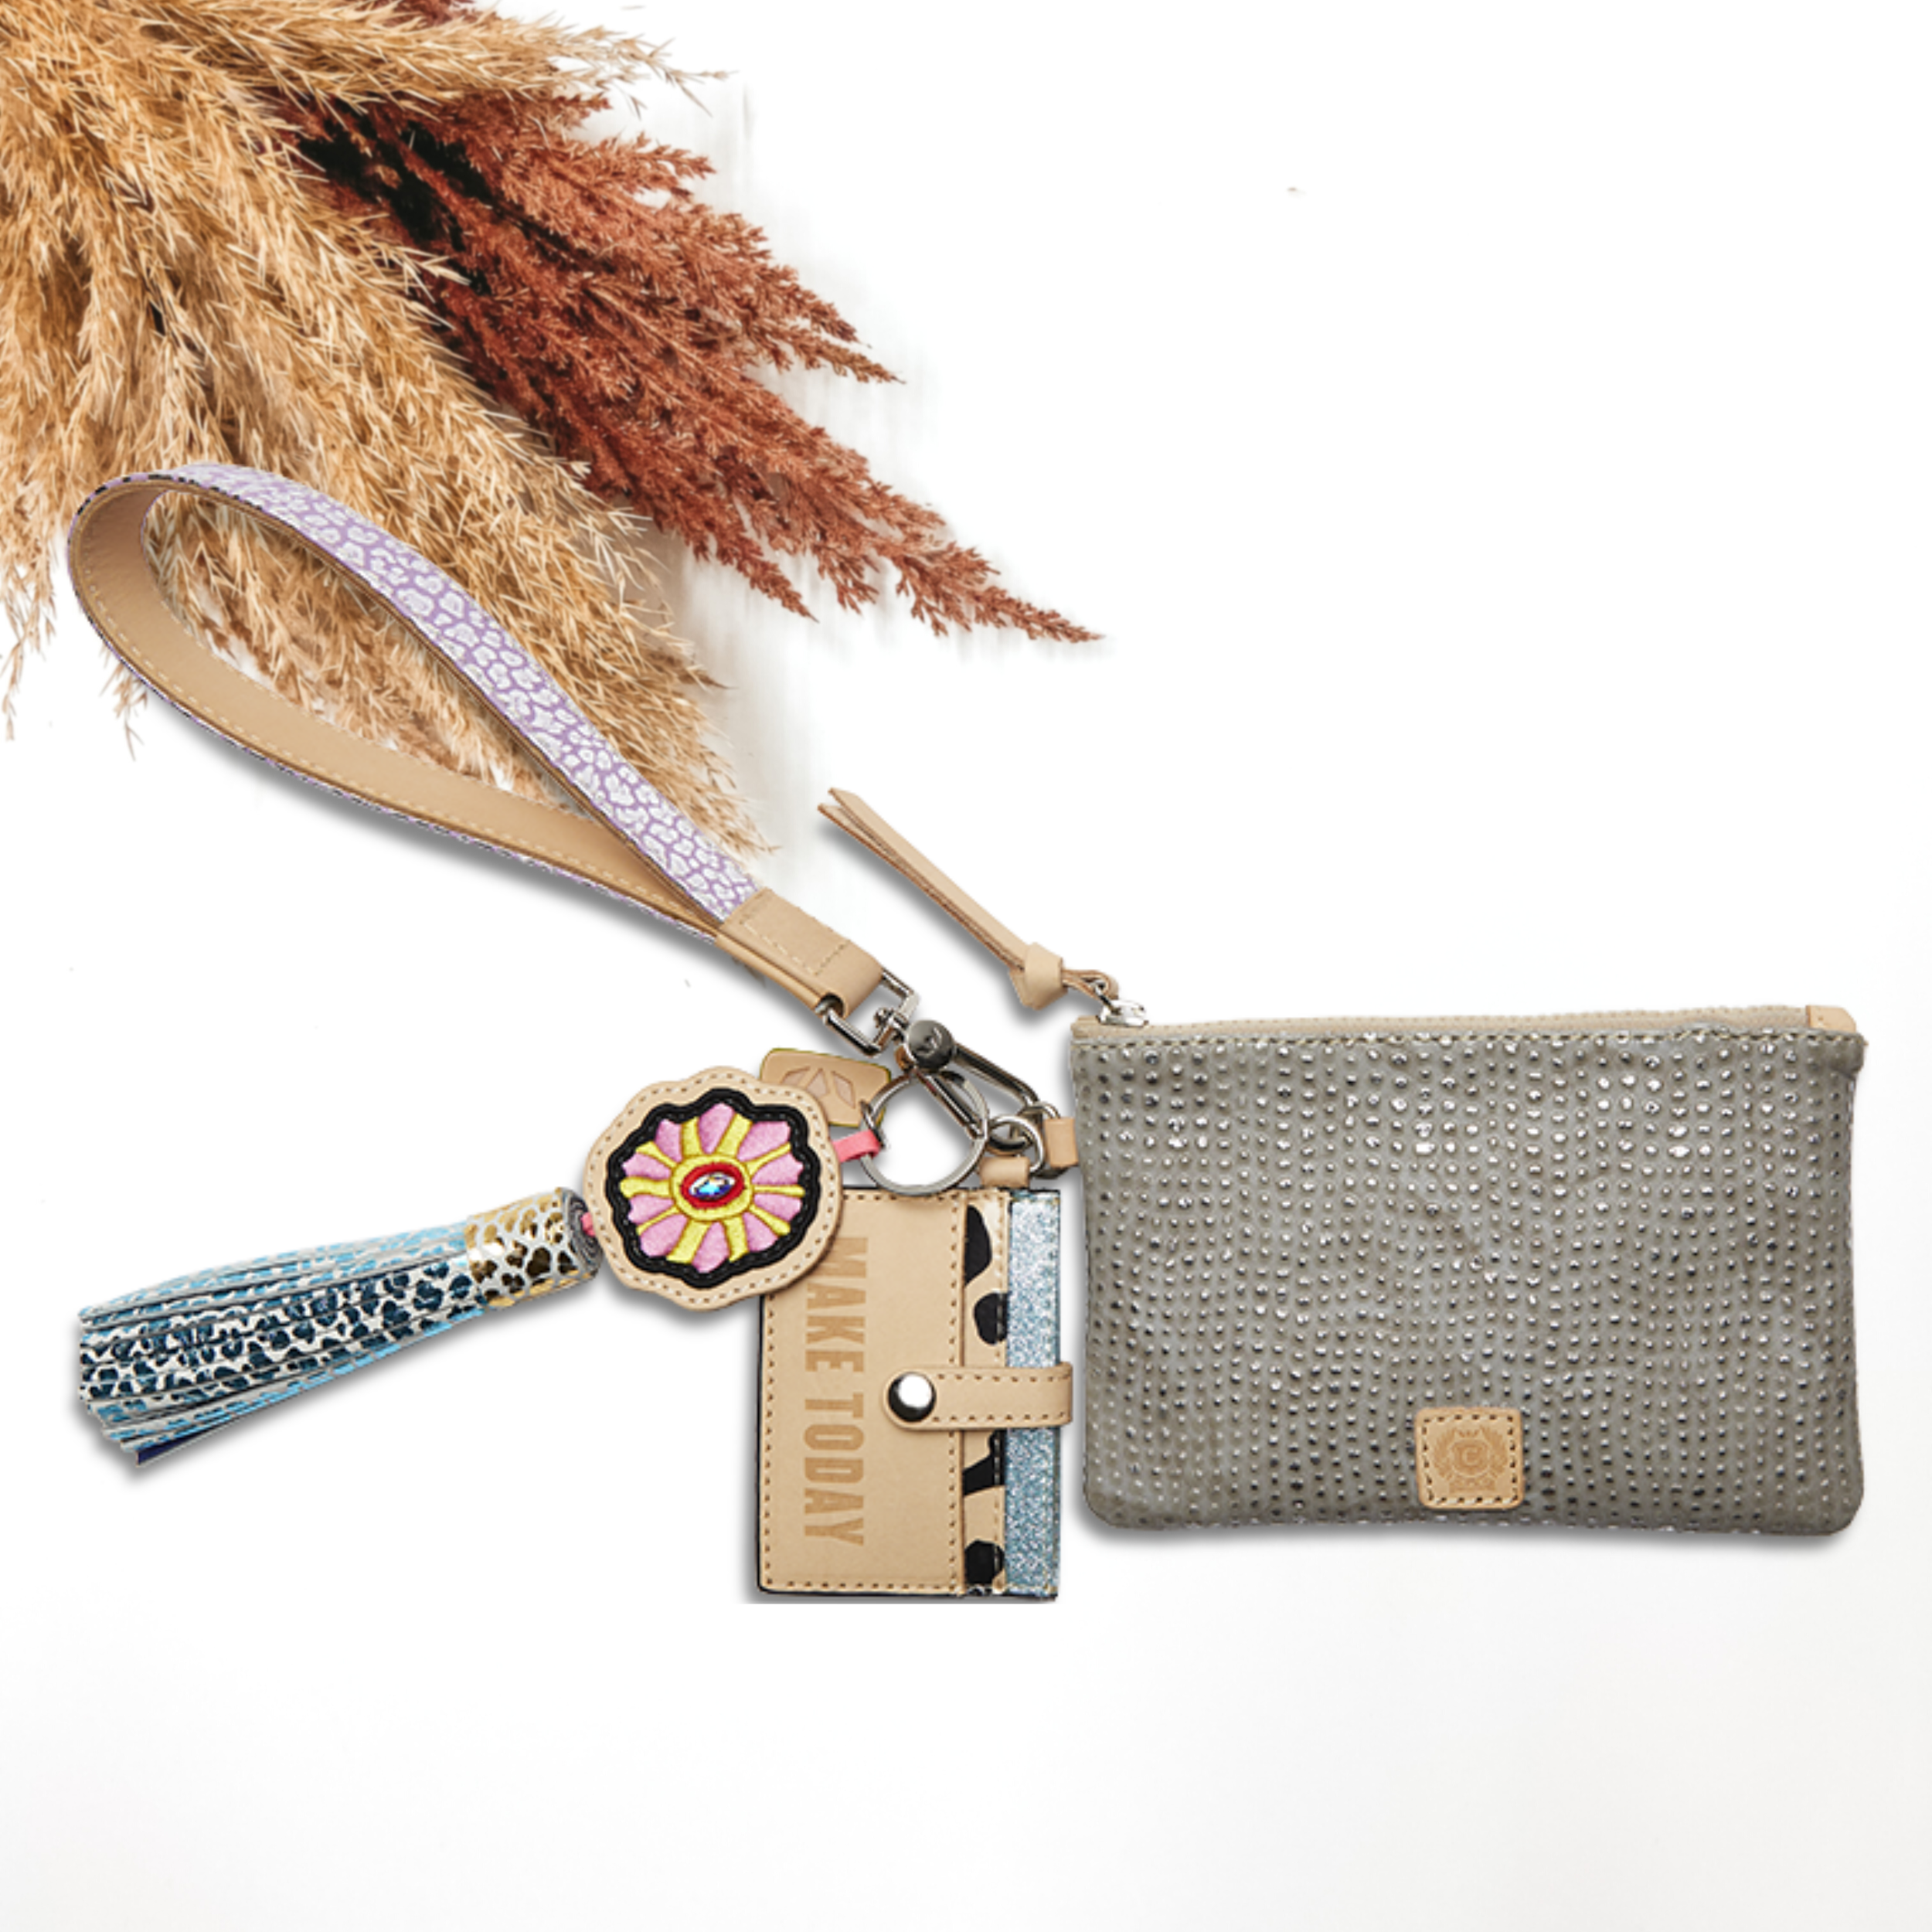 Pictured on a white background is a grey pouch with a light tan and purple wristlet. This pouch also includes a flower charm, light tan tassel on the zipper, and a card holder keychain.